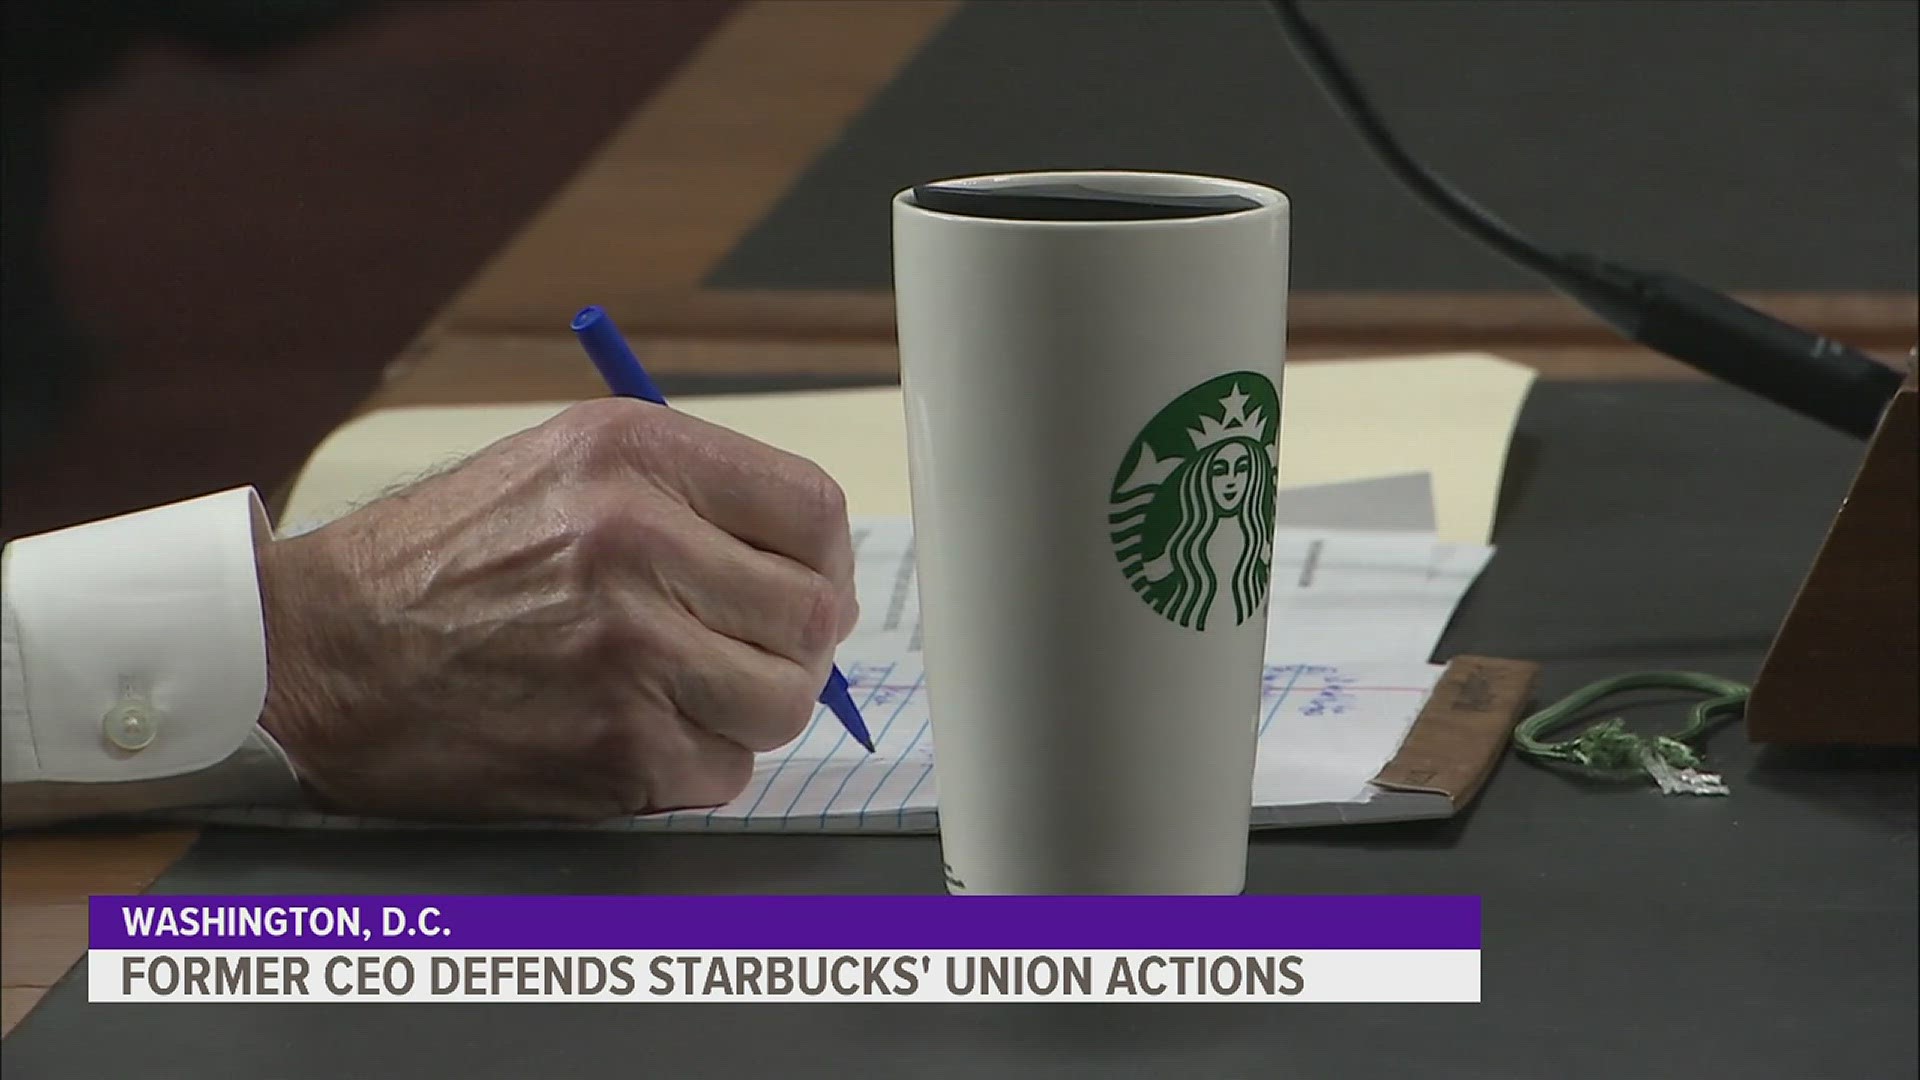 Workers say they want better pay and more consistent schedules. Starbucks says it functions better when it works directly with employees.